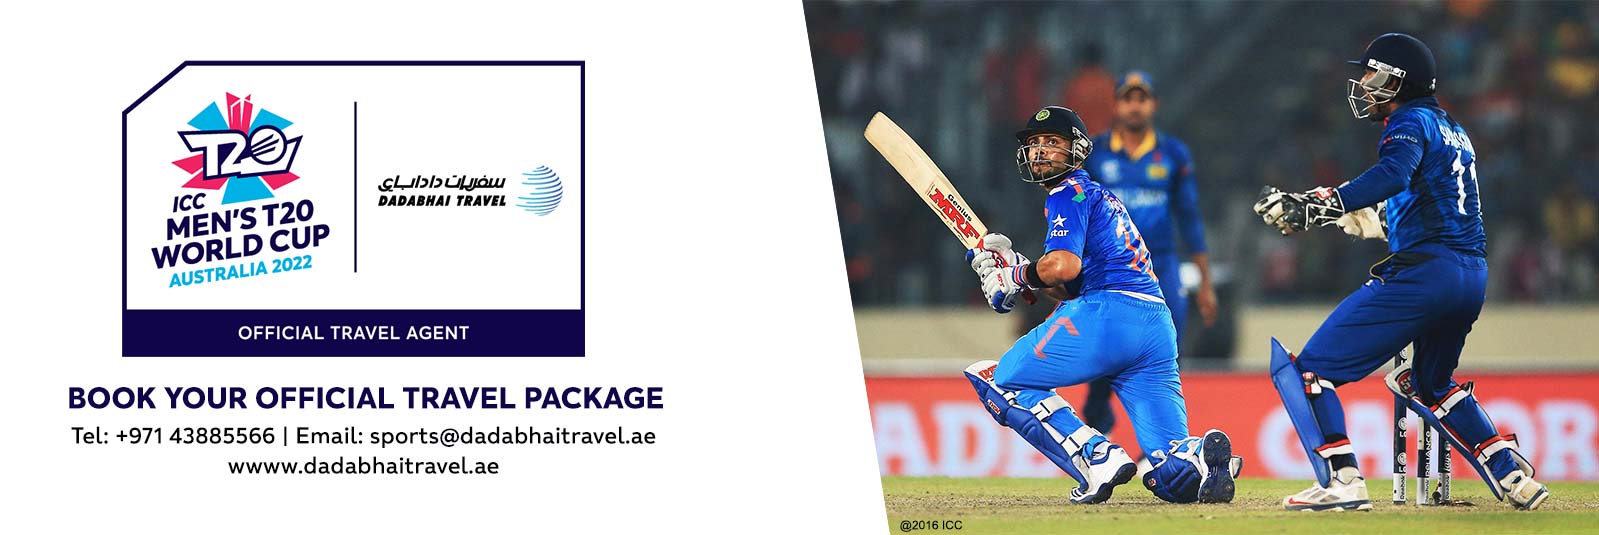 ICC T20 World Cup 2020 Ticket and Travel Package